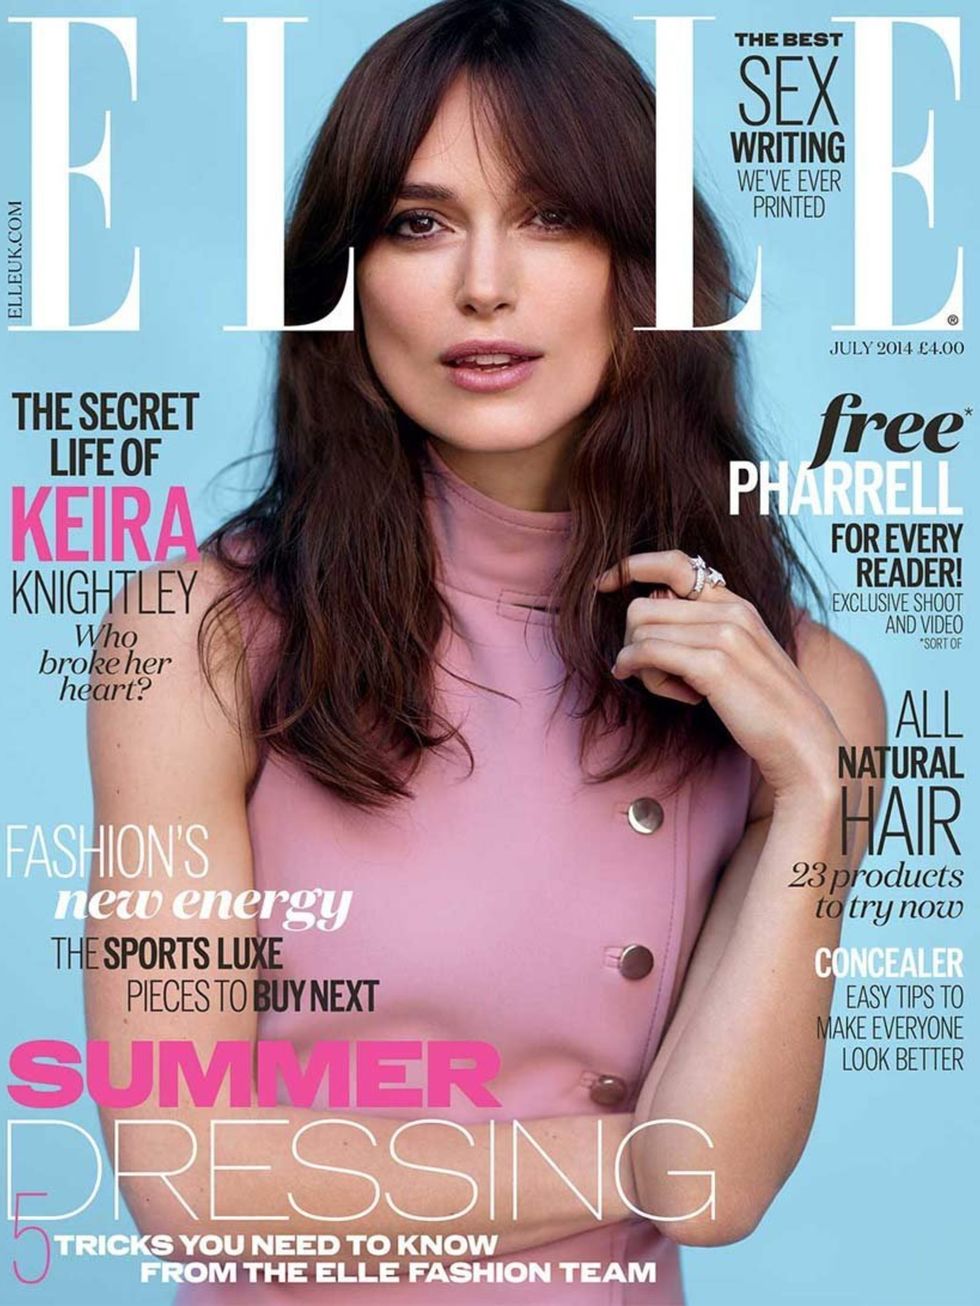 &lt;p&gt;&lt;a href=&quot;http://www.elleuk.com/star-style/celebrity-style-files/keira-knightley-s-style-file&quot;&gt;Keira Knightley&lt;/a&gt; is gracing this month&#039;s ELLE cover and we want (strike that) need her make-up look. It&#039;s very &#039;